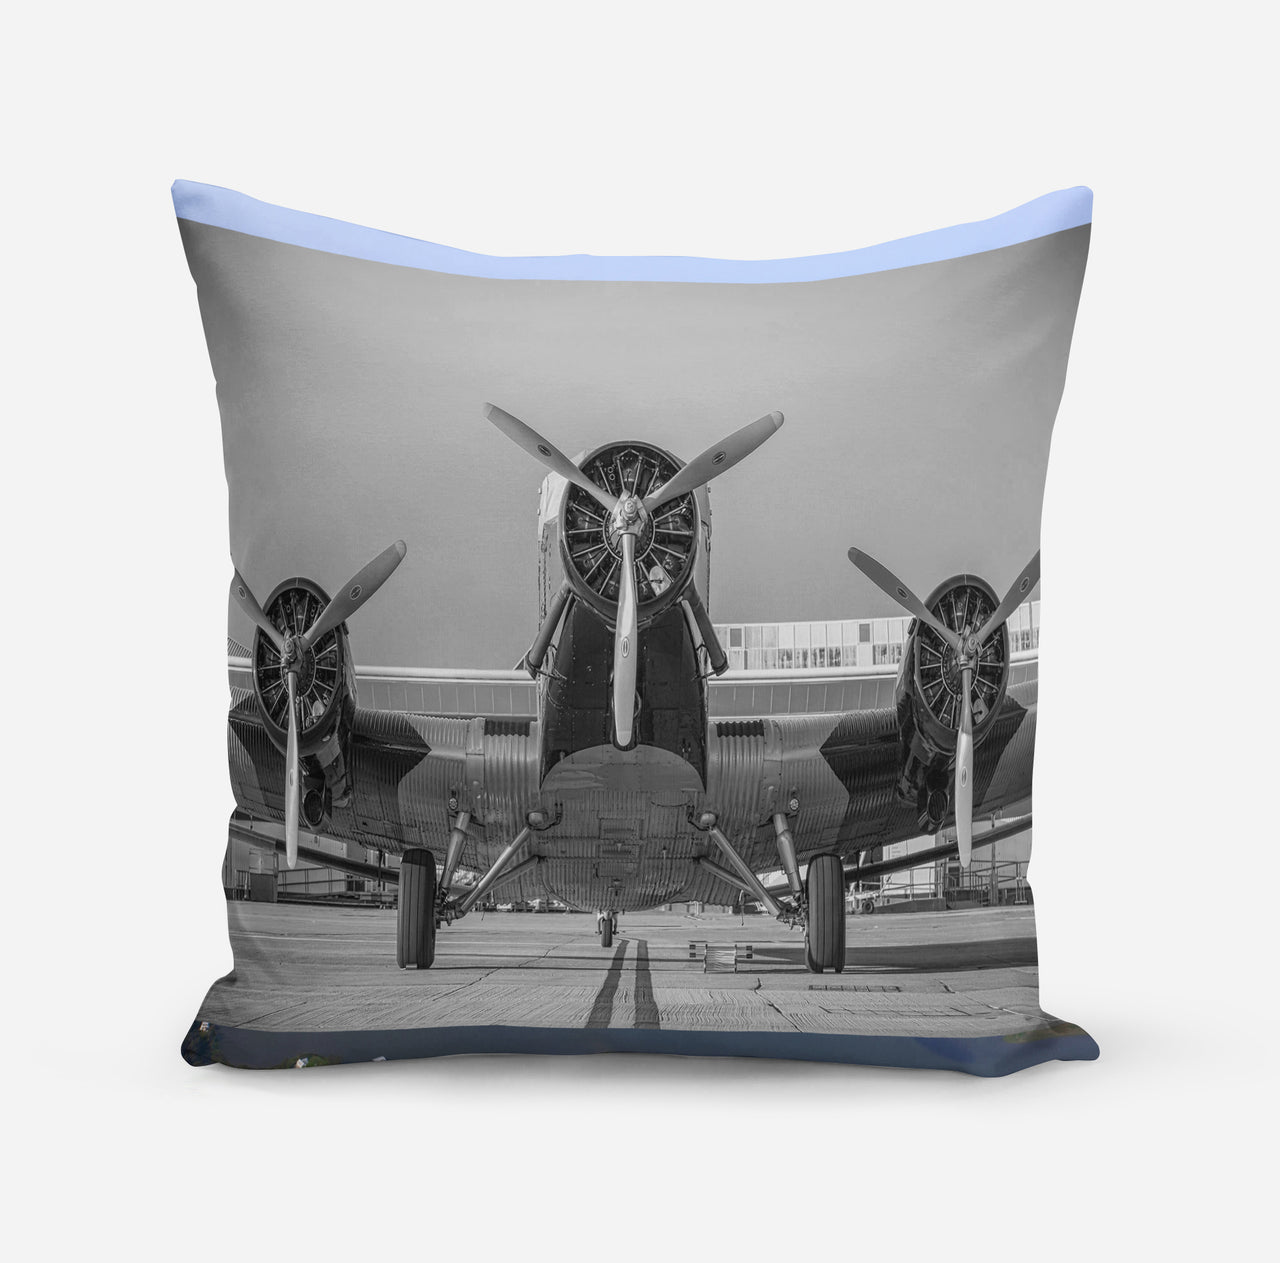 Face to Face to 3 Engine Old Airplane Designed Pillows